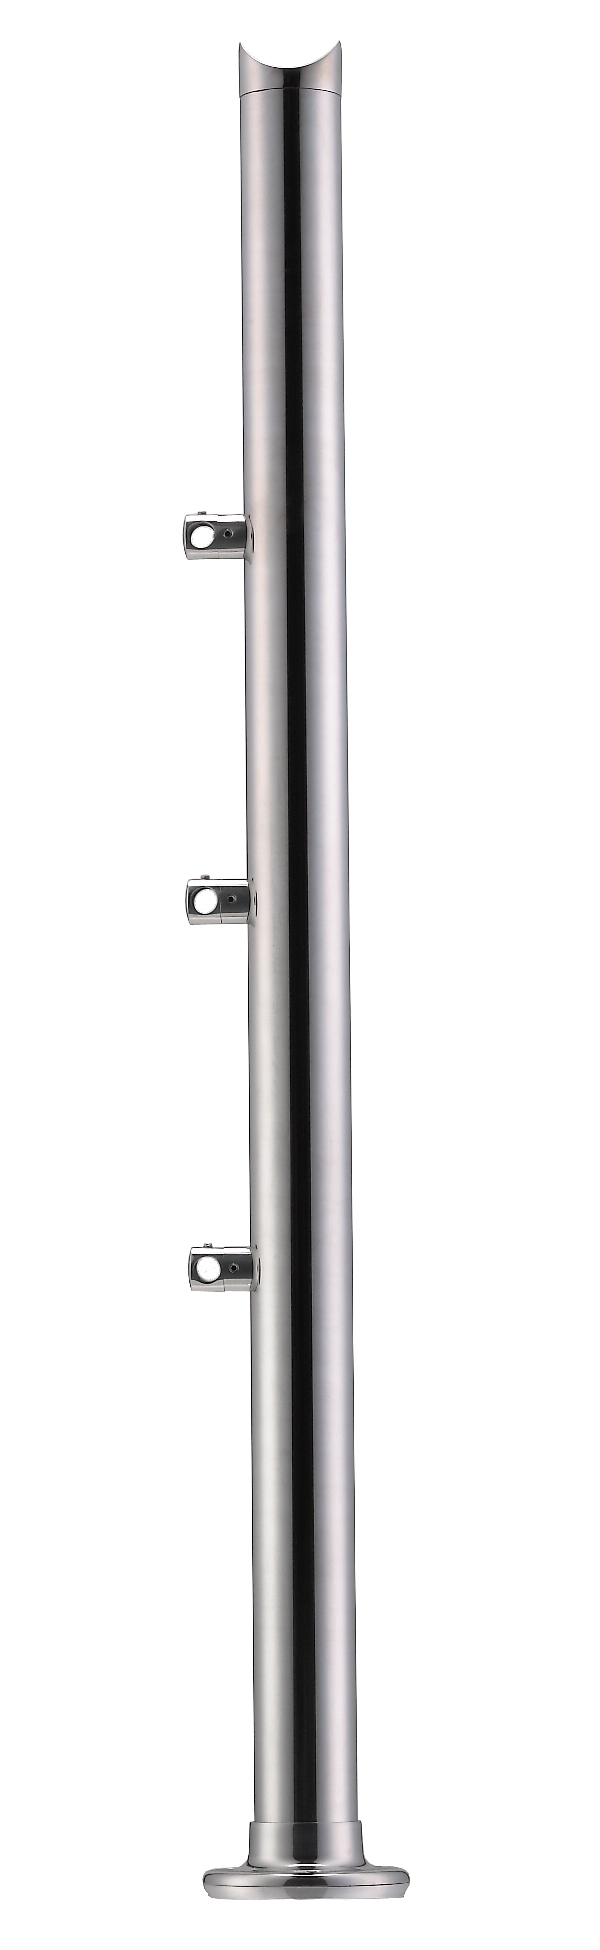 Stainless Steel Balustrade Posts - Tubular - SS:2020376A